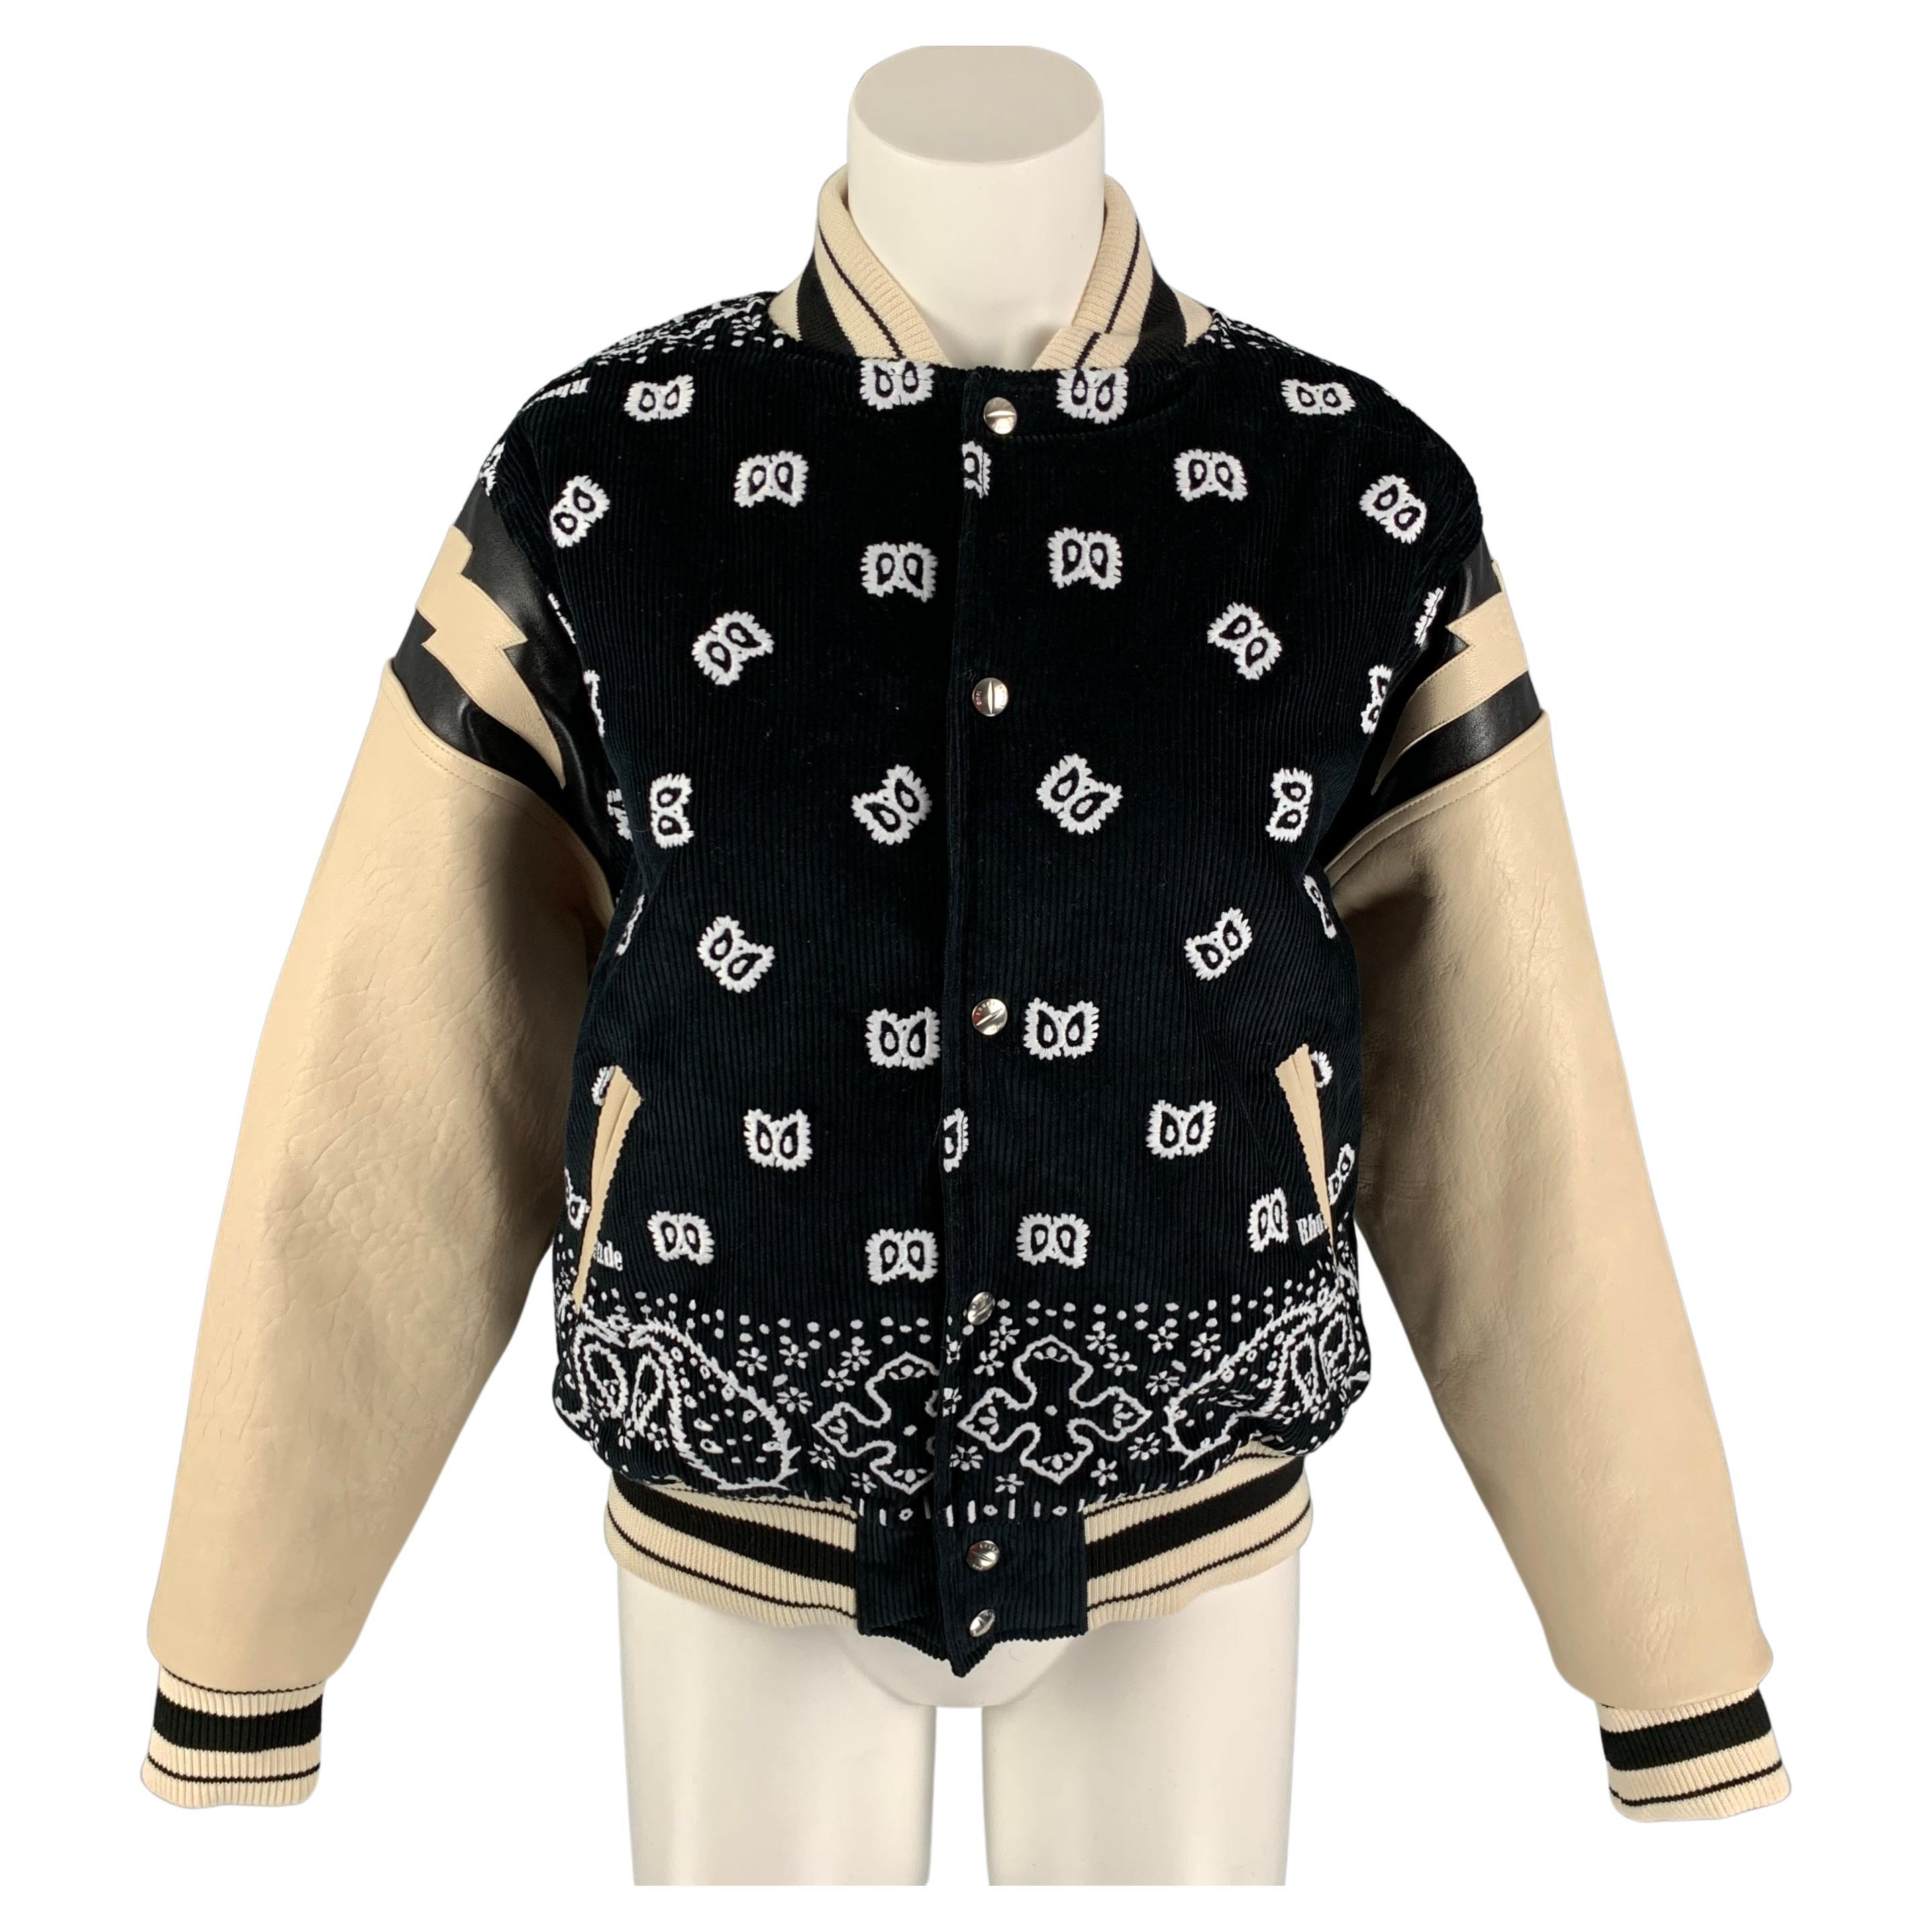 RHUDE SS 22 Size S Black Cream Cotton Embroidered Leather Bomber Jacket